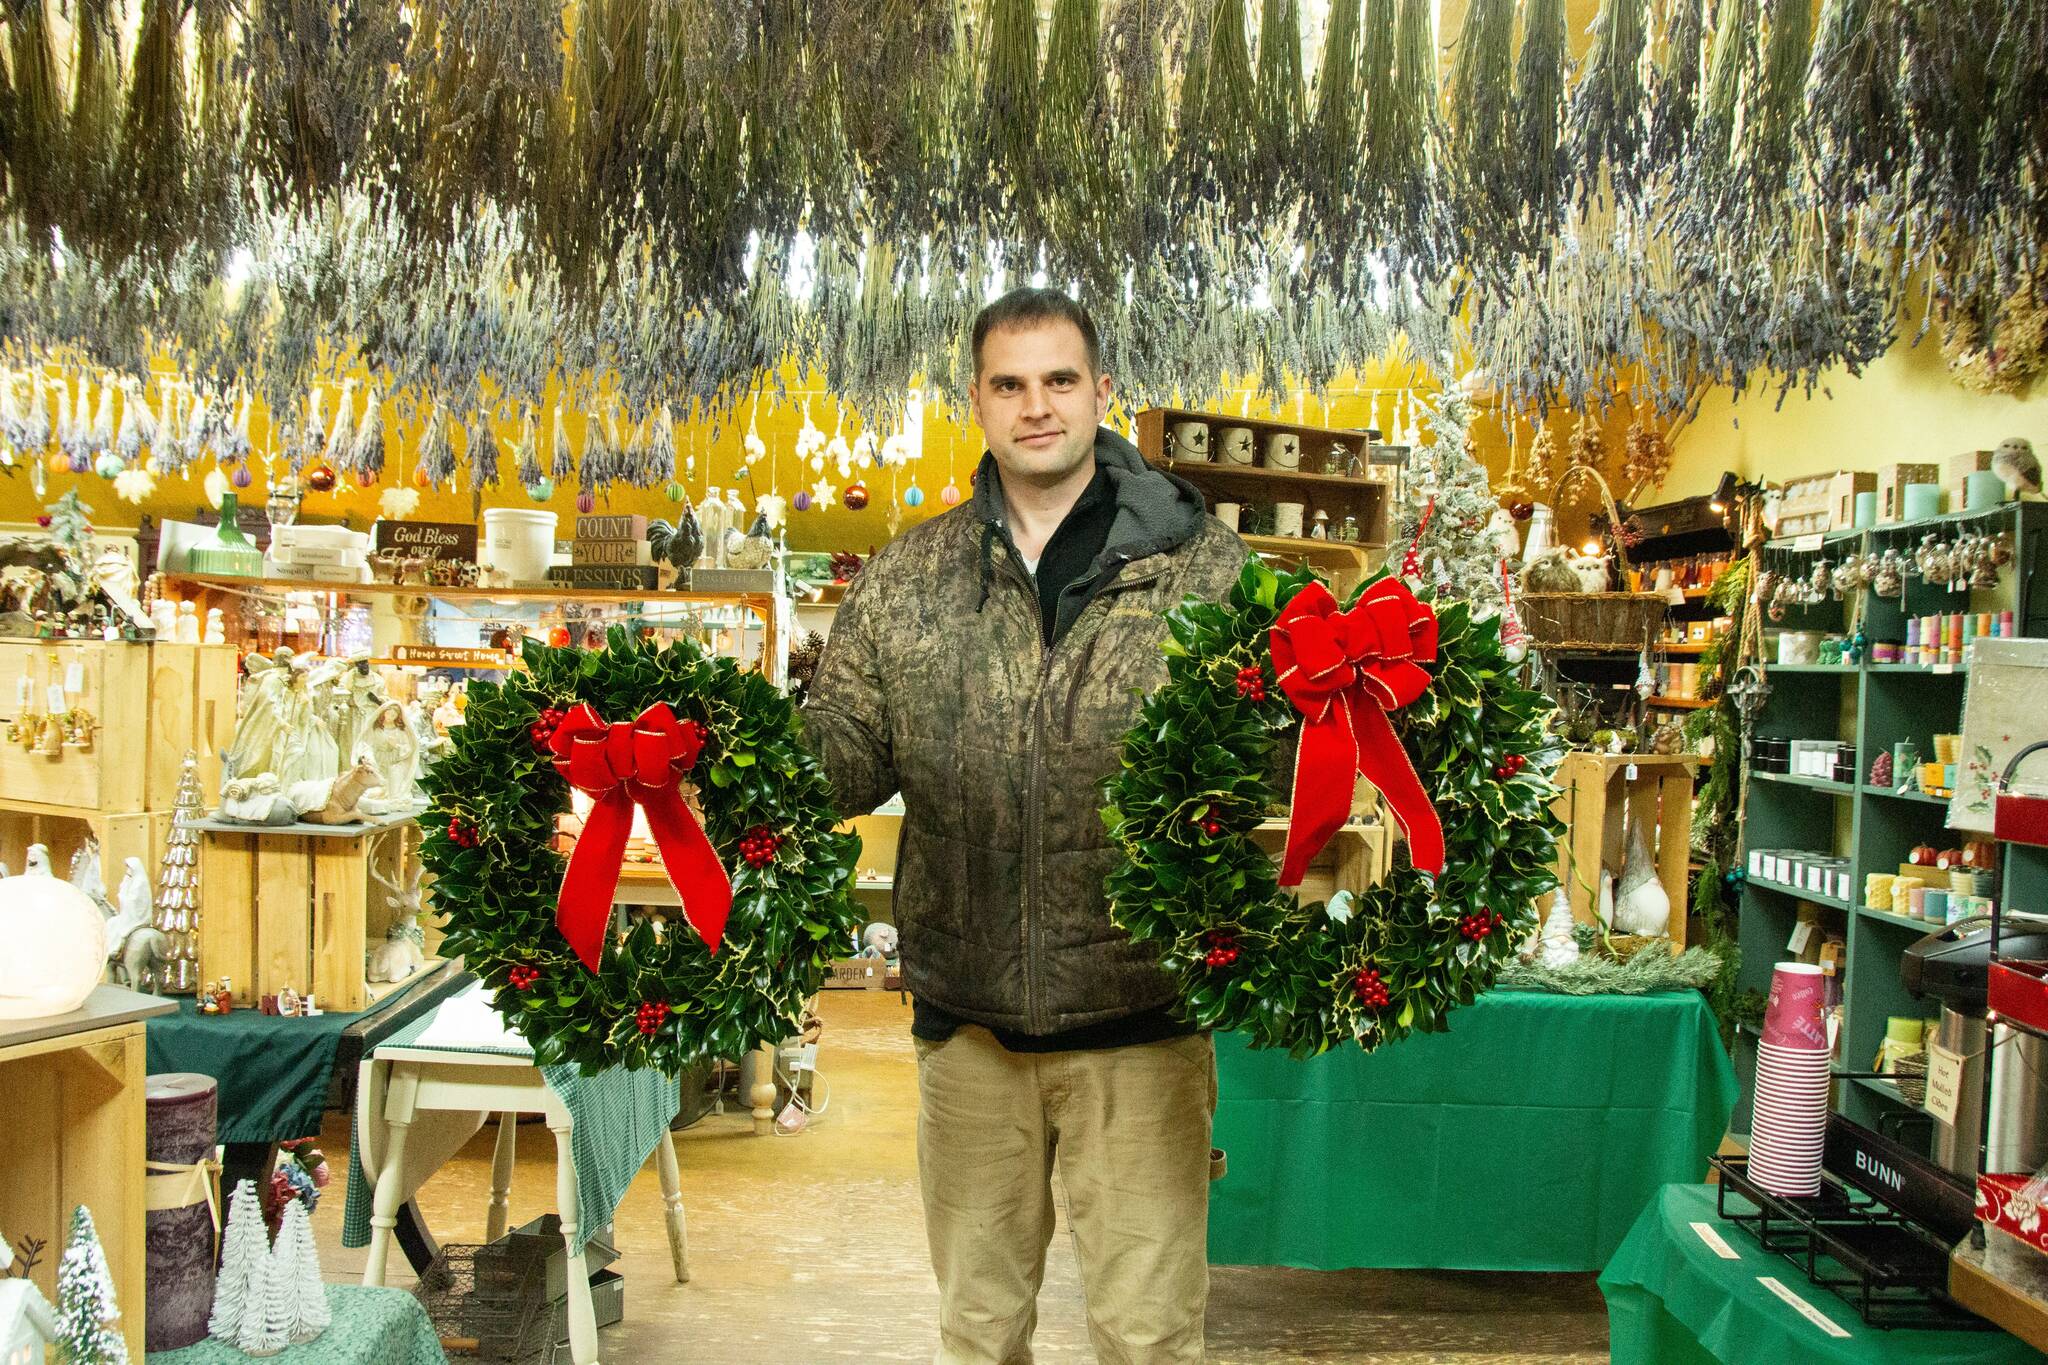 Isaiah Rawls, greens manager at A Knot in Thyme, poses with some freshly made wreaths. (Photo by Luisa Loi)